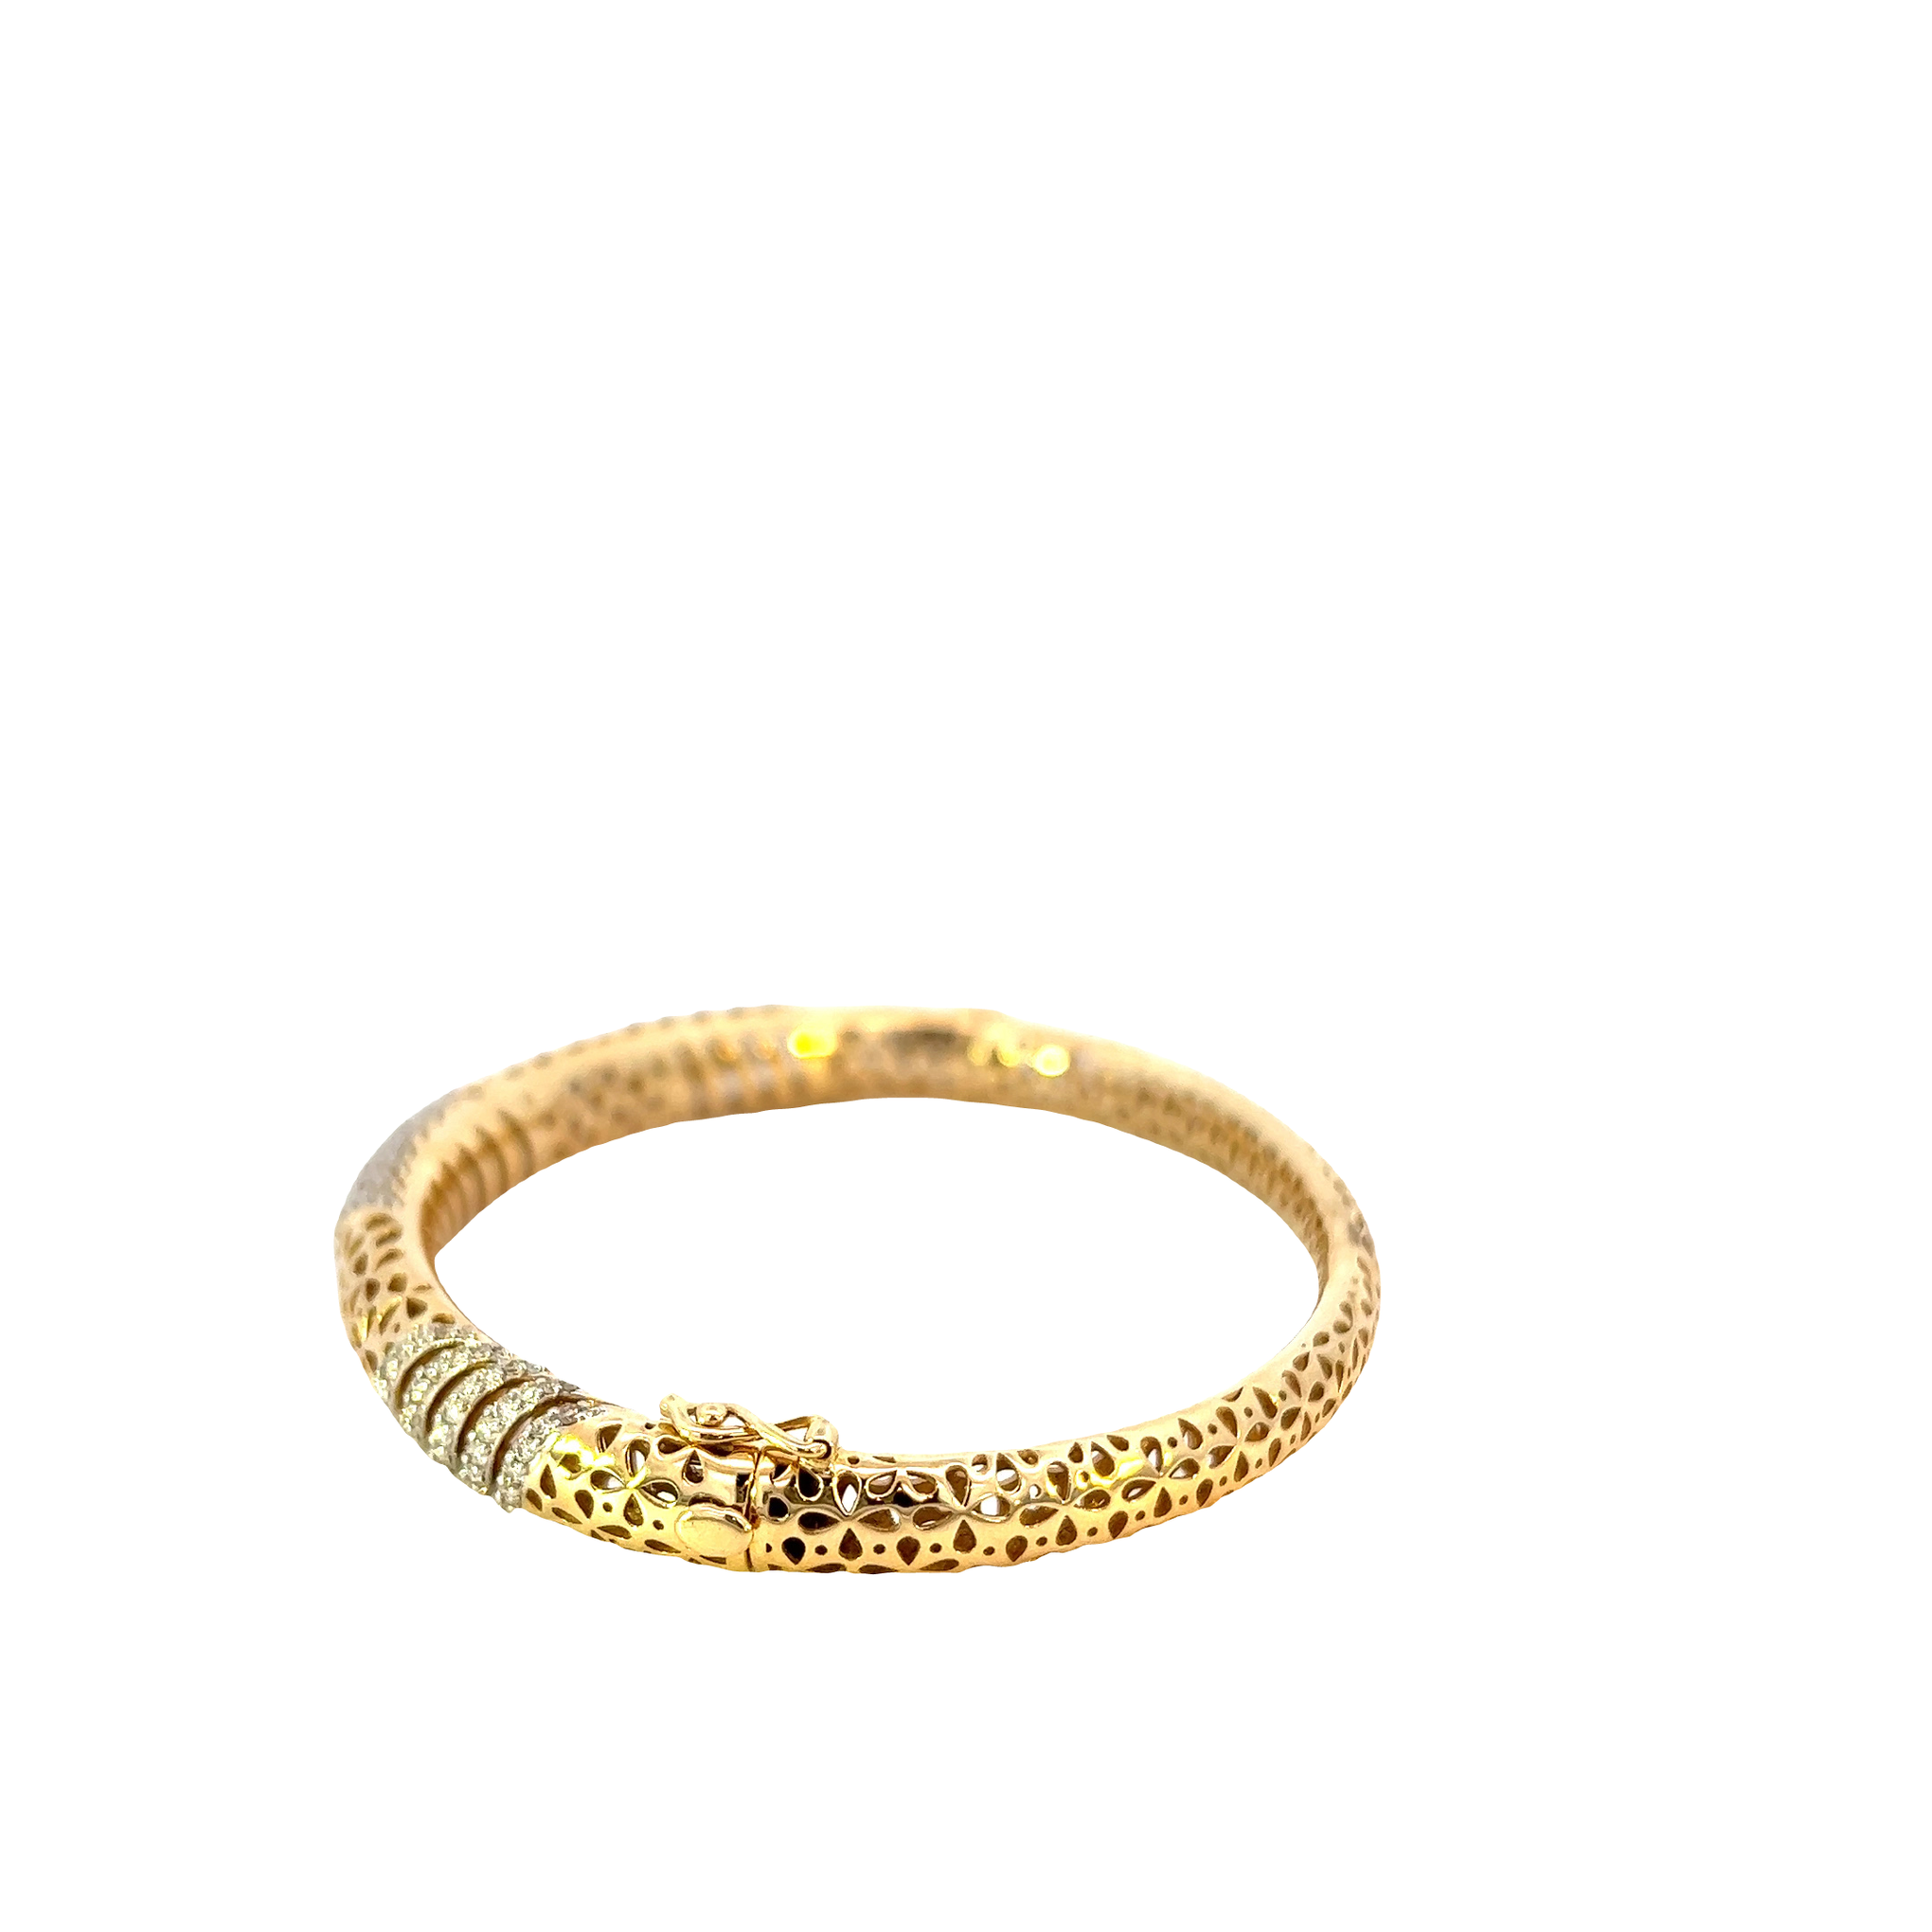 14KT Yellow Gold With Round Cut Diamonds Swirl Design With Eyelet Detailing Bangle